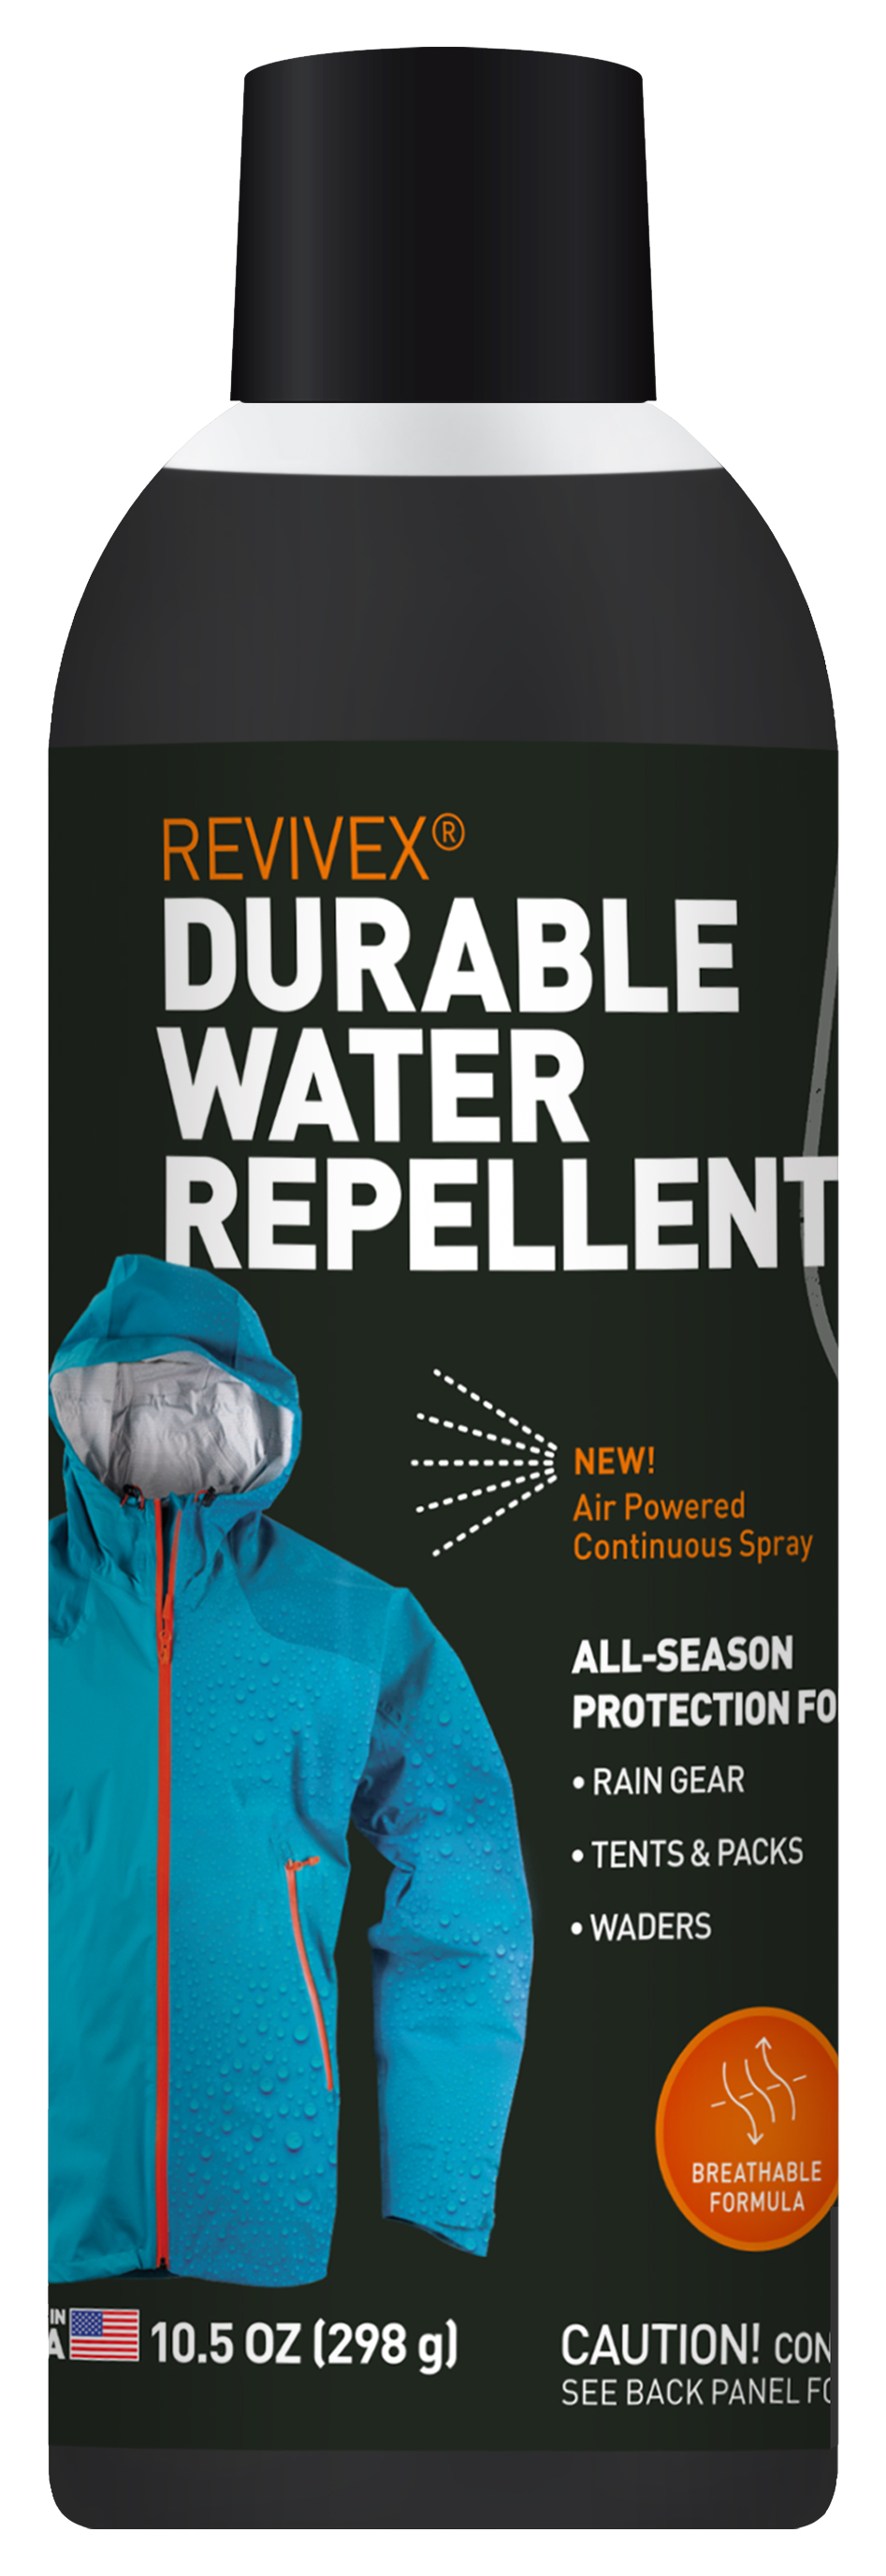 Gear Aid Revivex Spray-On Water Repellent for Soft Shells - 10 oz bottle